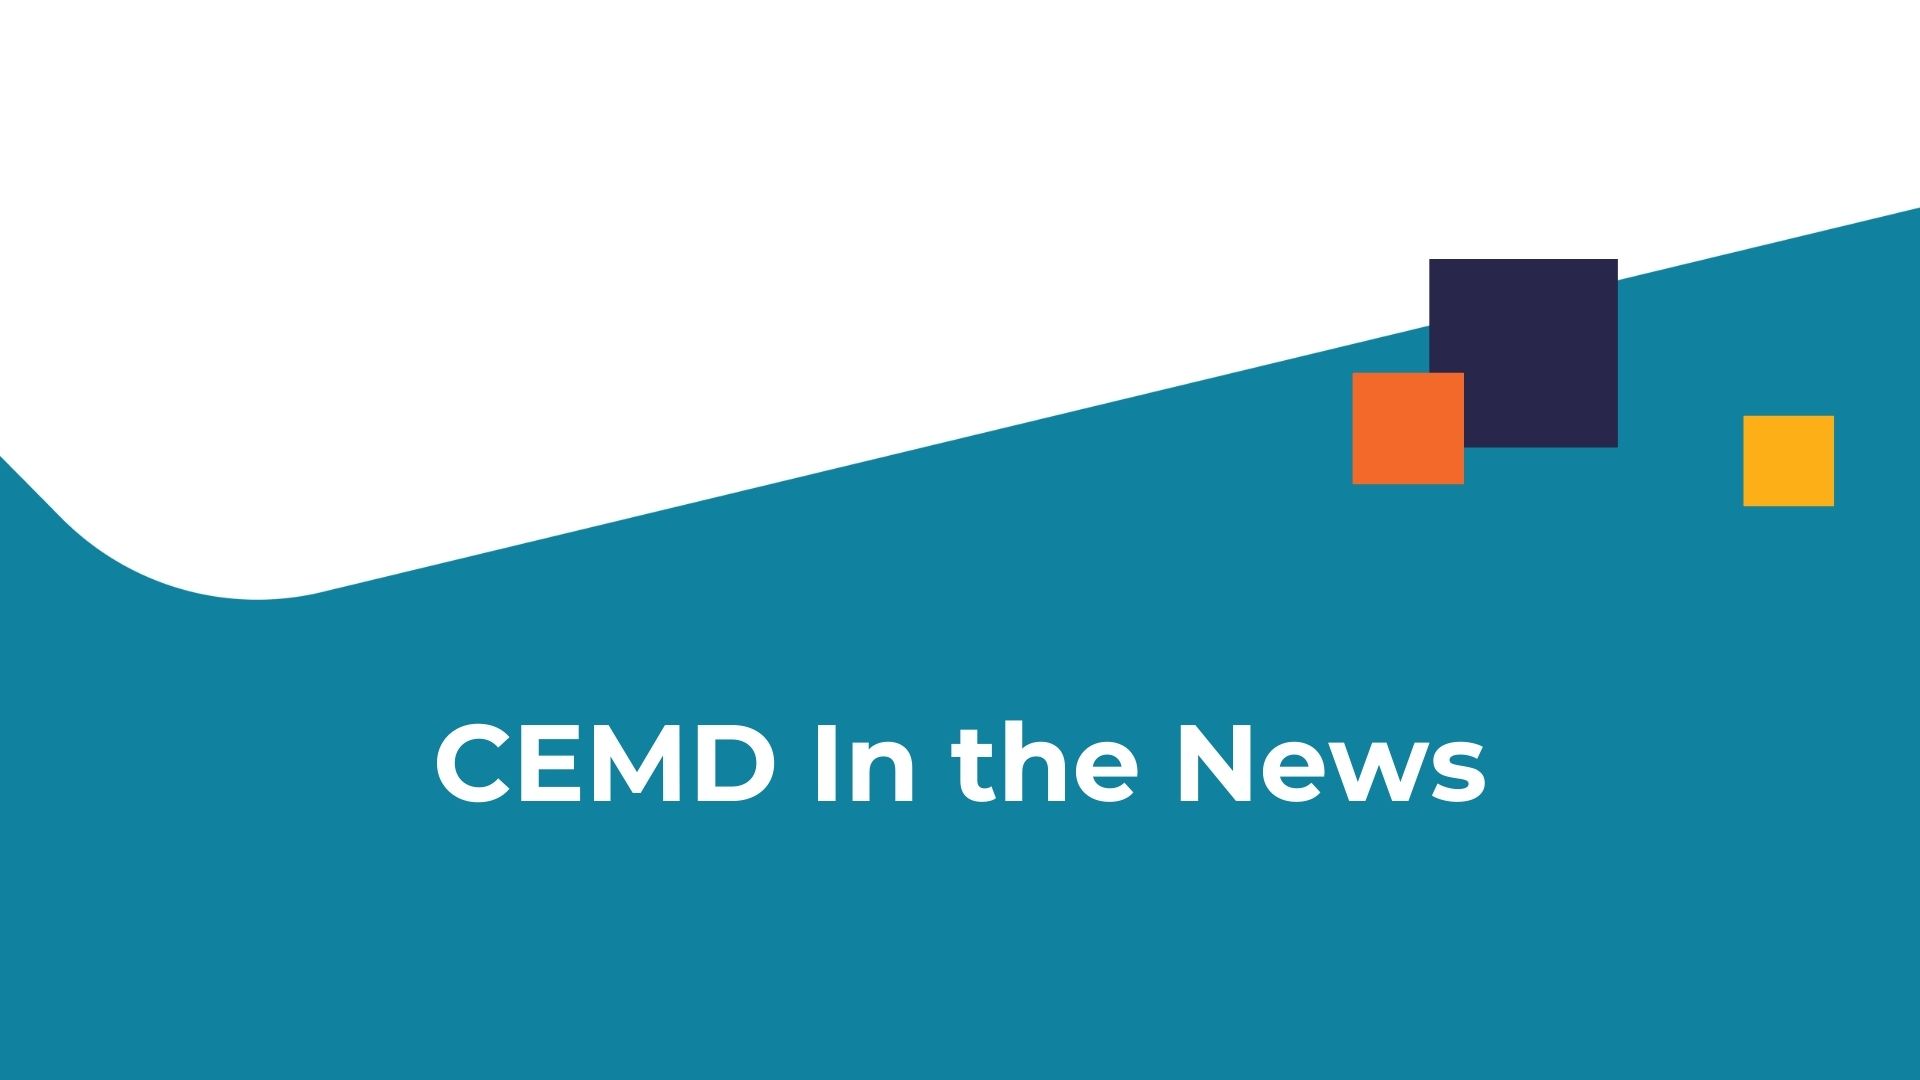 CEMD branded teal and white background with three graphic squares in dark navy, orange, and yellow of varying sizes with text, "CEMD In the News."